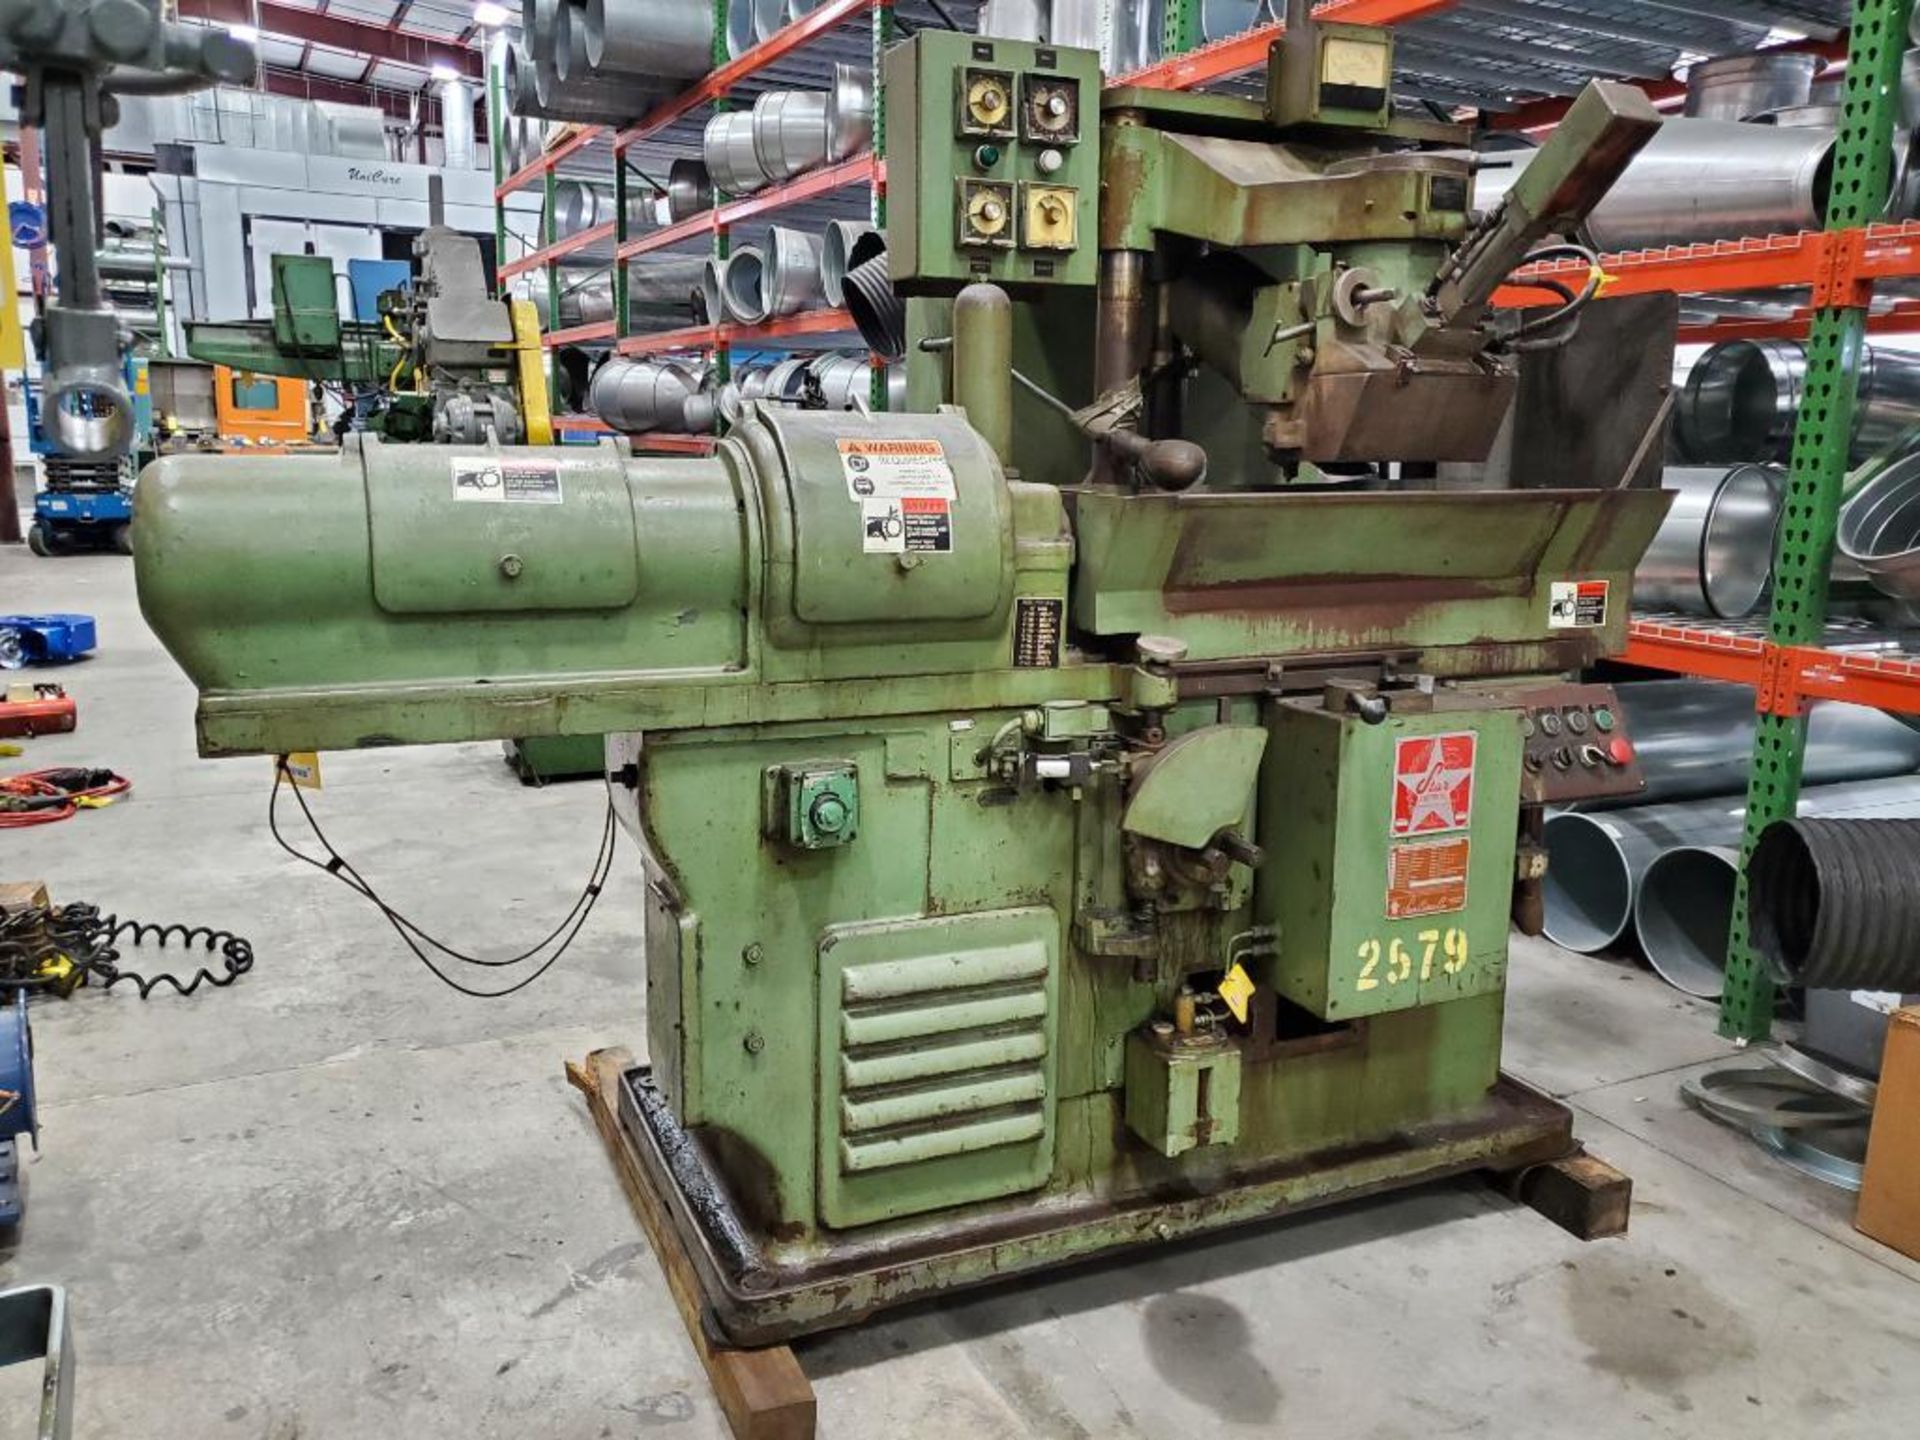 Star-Cutter Hydraulic OD Grinder/Dresser, Model 11X16, S/N B-0002-71, Manual/ Continuous Operation - Image 3 of 11